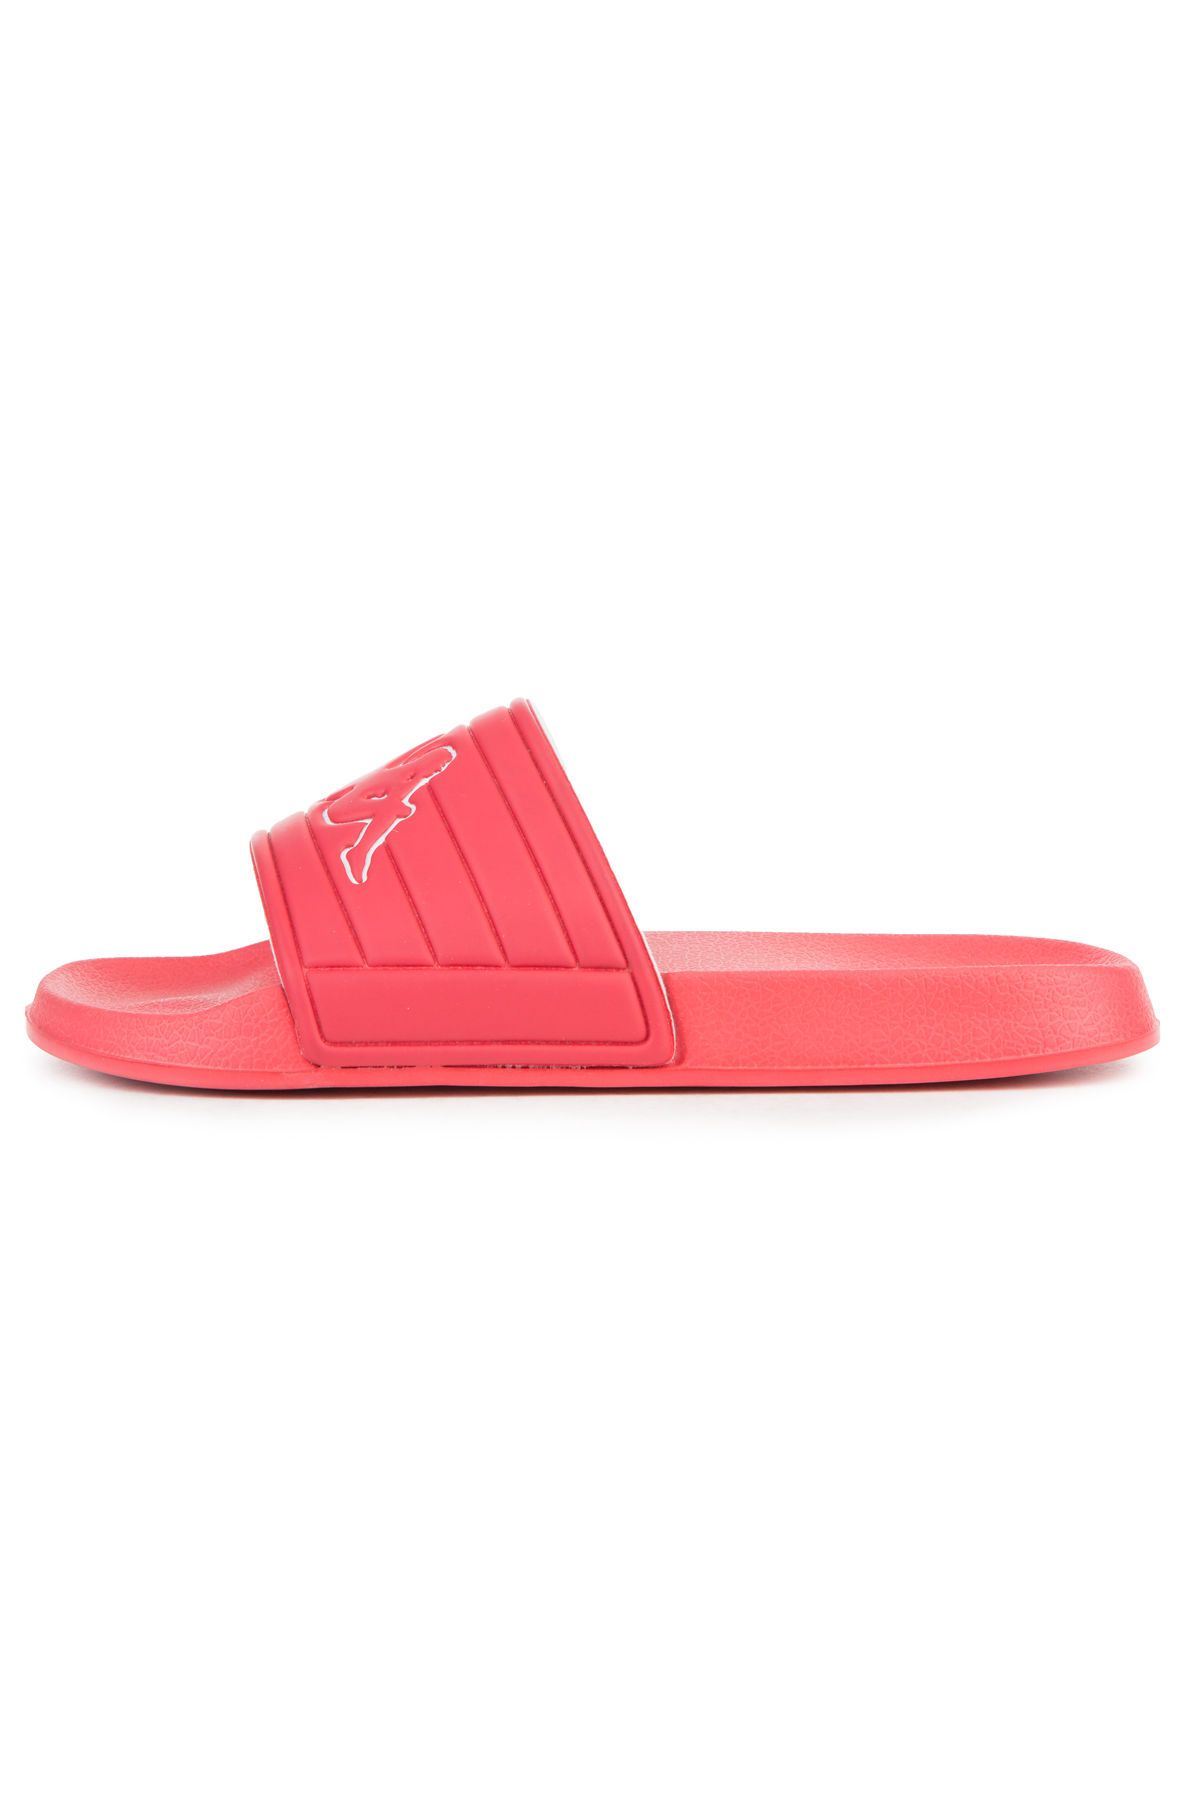 KAPPA The Logo Matese Slides in Red and White 303XS50-912-RED - Shiekh